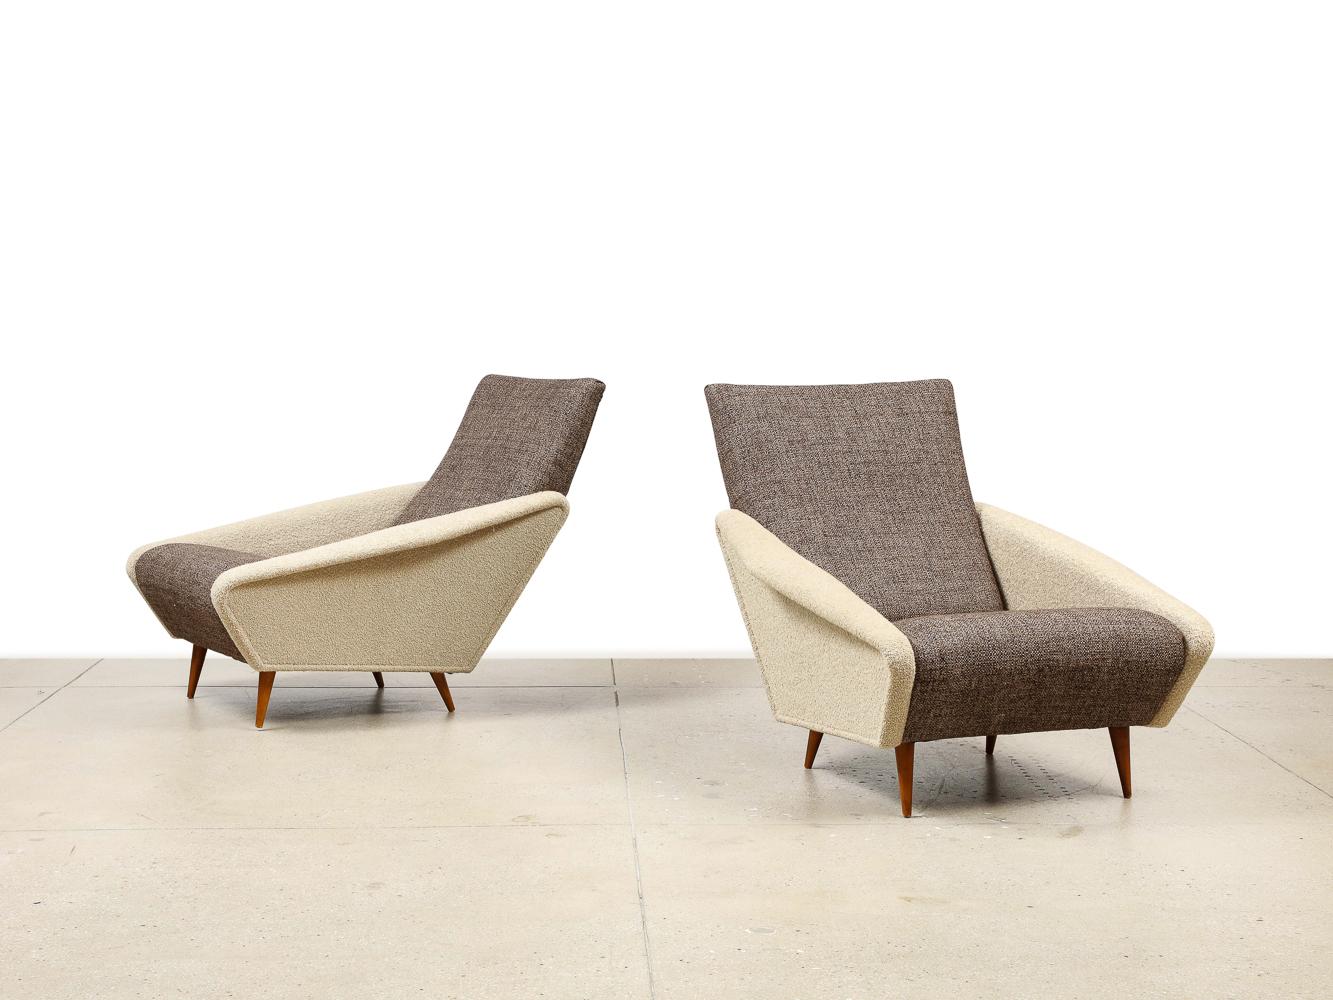 Hand-Crafted Gio Ponti Lounge Chairs For Sale